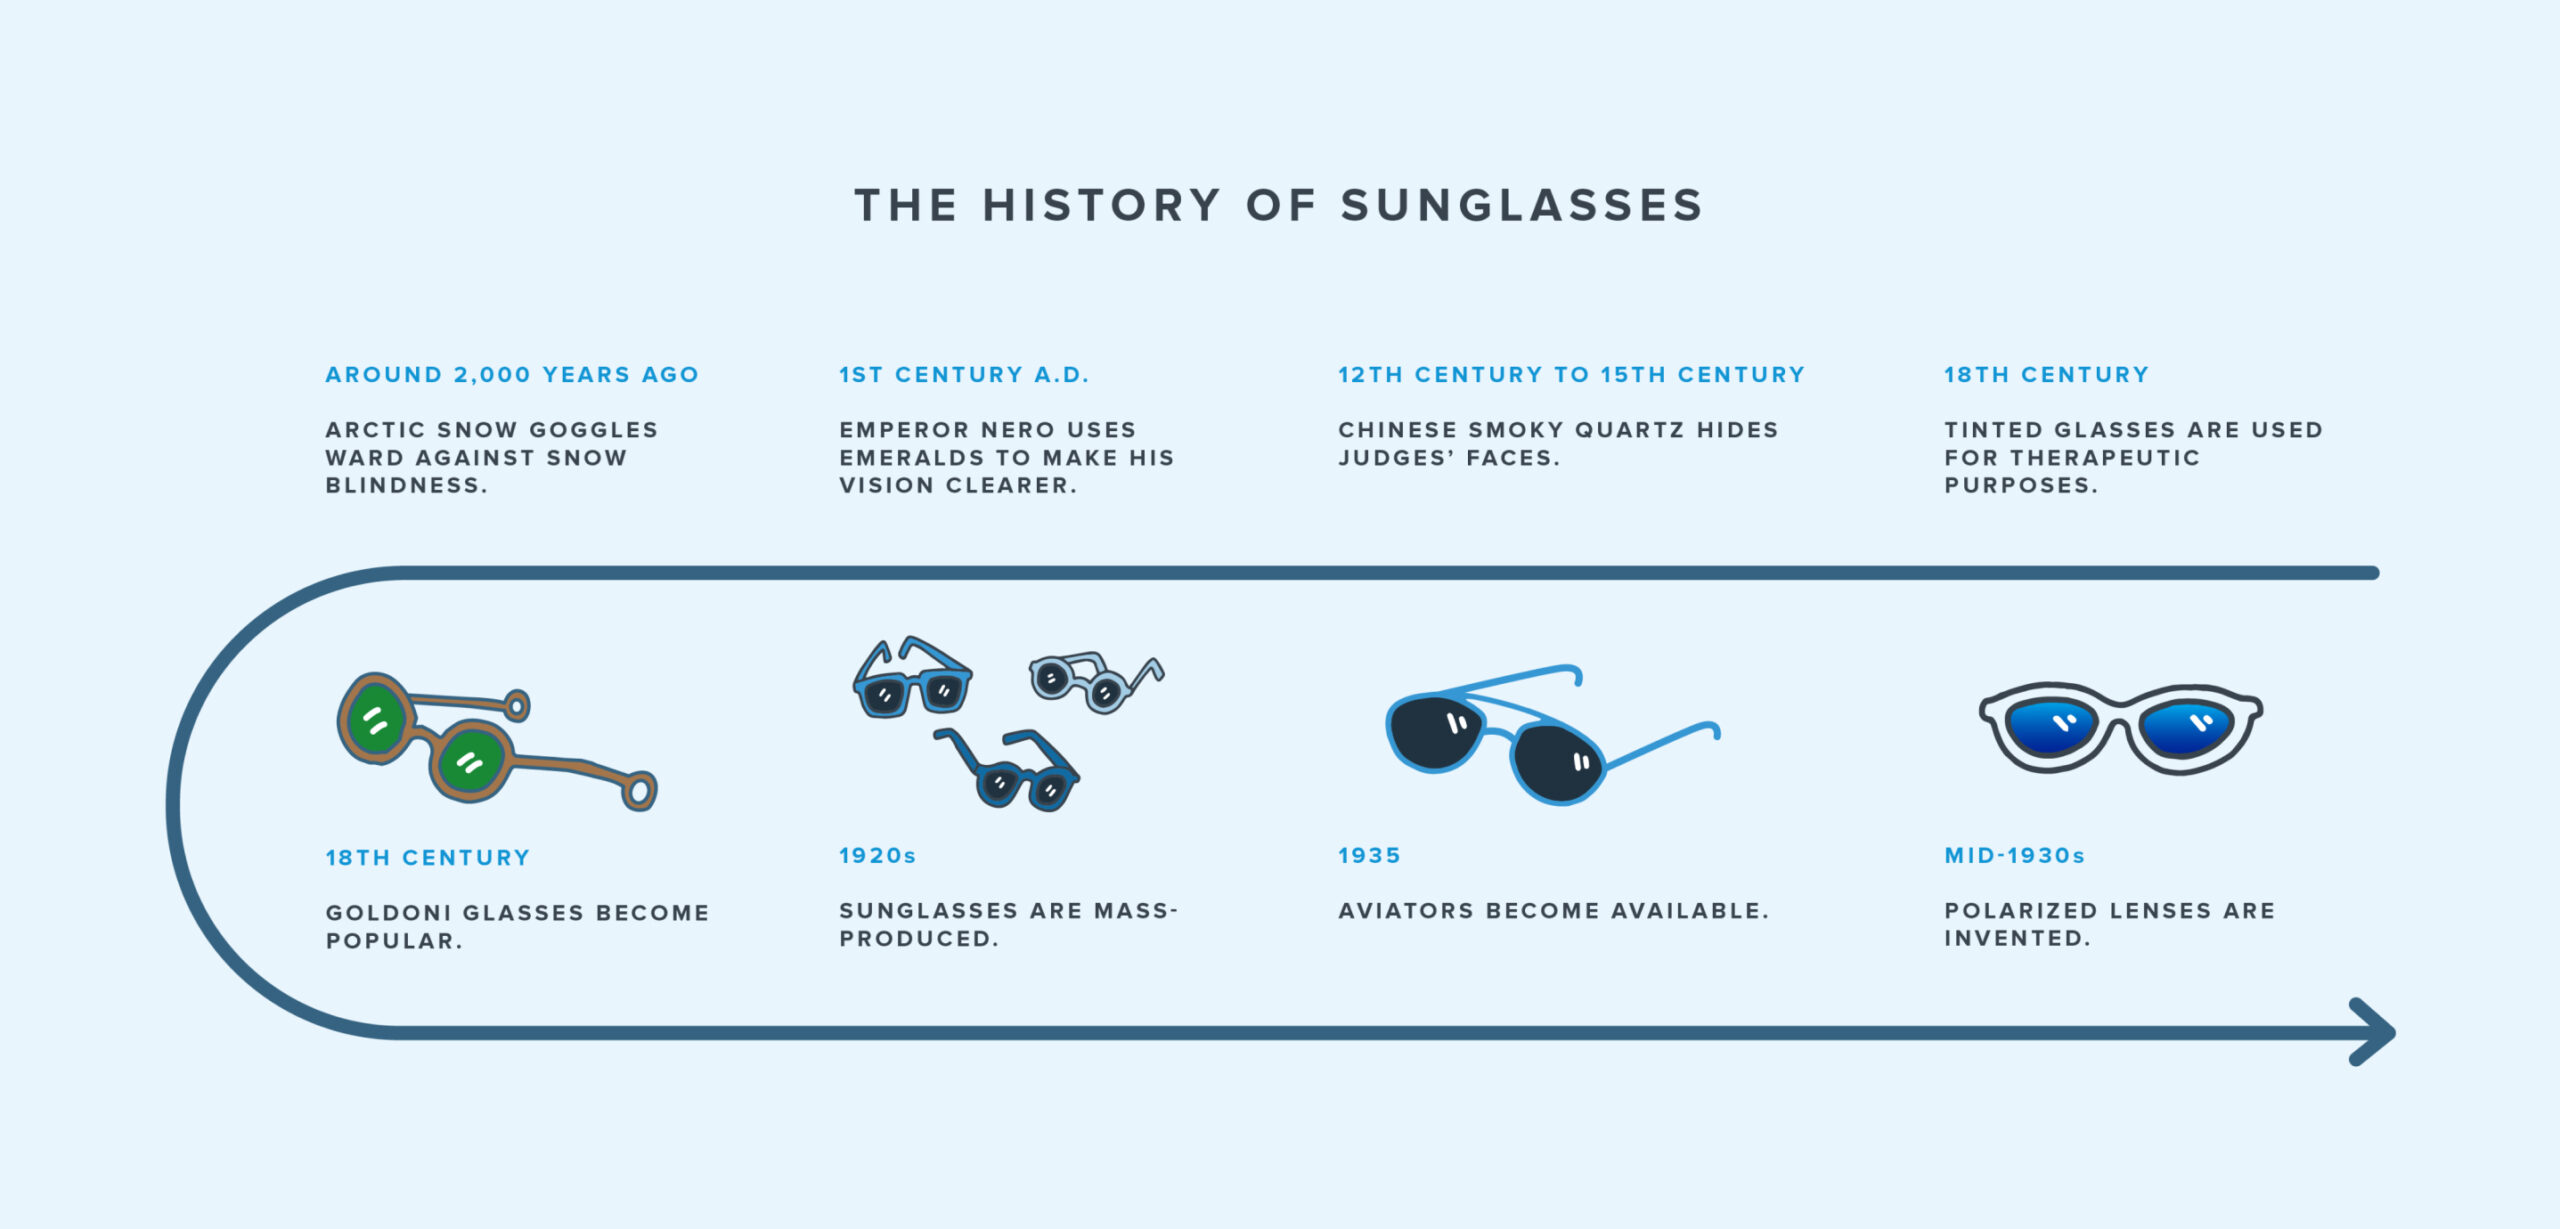 An illustrated timeline showing the history of sunglasses